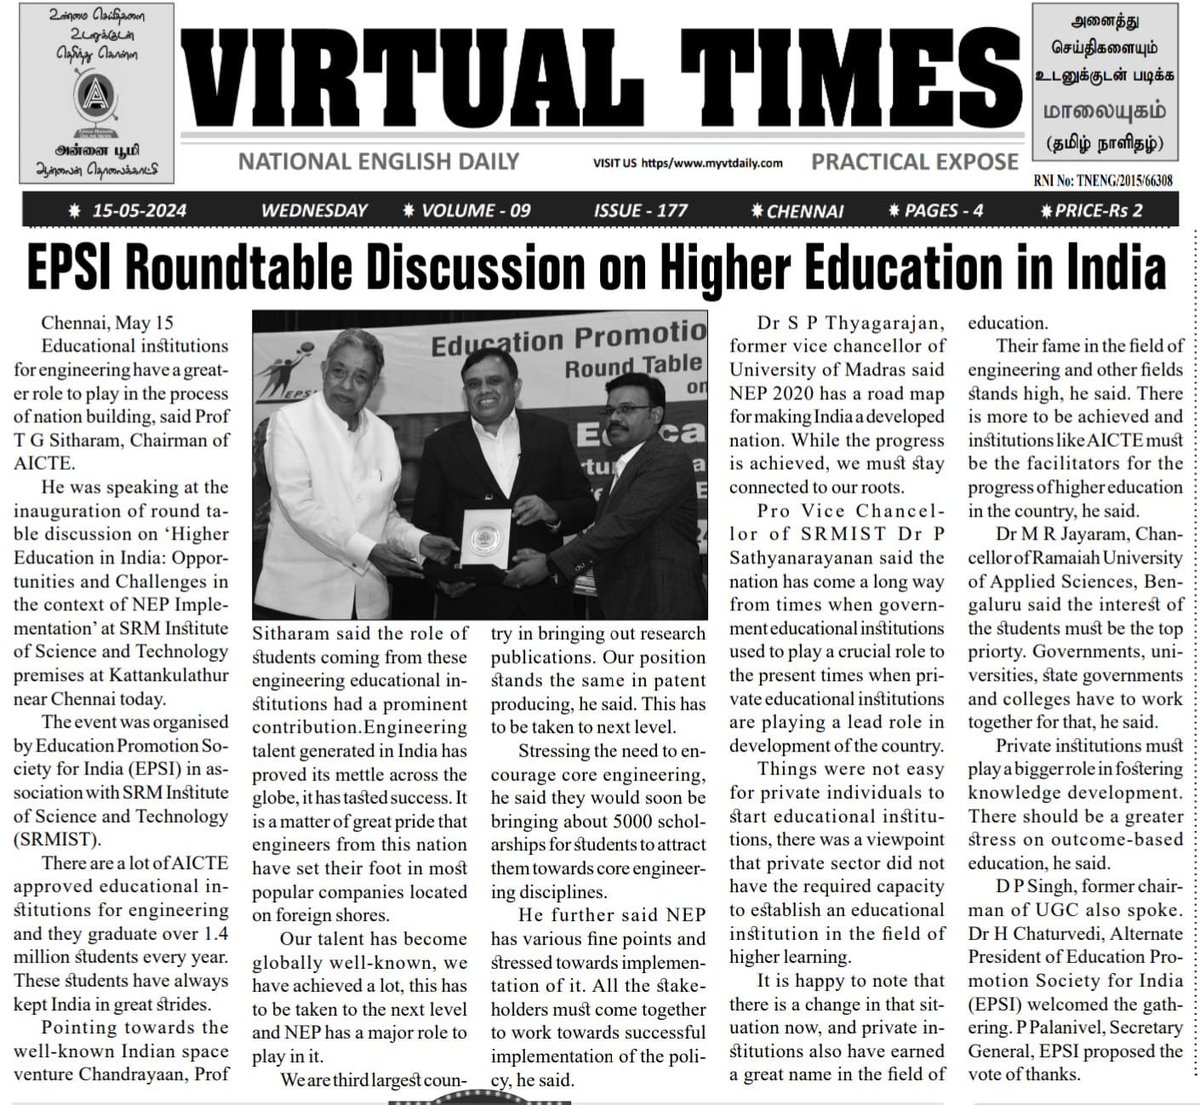 #AICTENews: Educational institutions for engineering have a greater role to play in process of nation building, said AICTE Chairman Prof @SITHARAMtg at the inauguration of round table discussion on 'Higher Education in India', organised by @EPSIIndia at @SRM_Univ on 14 May 2024.